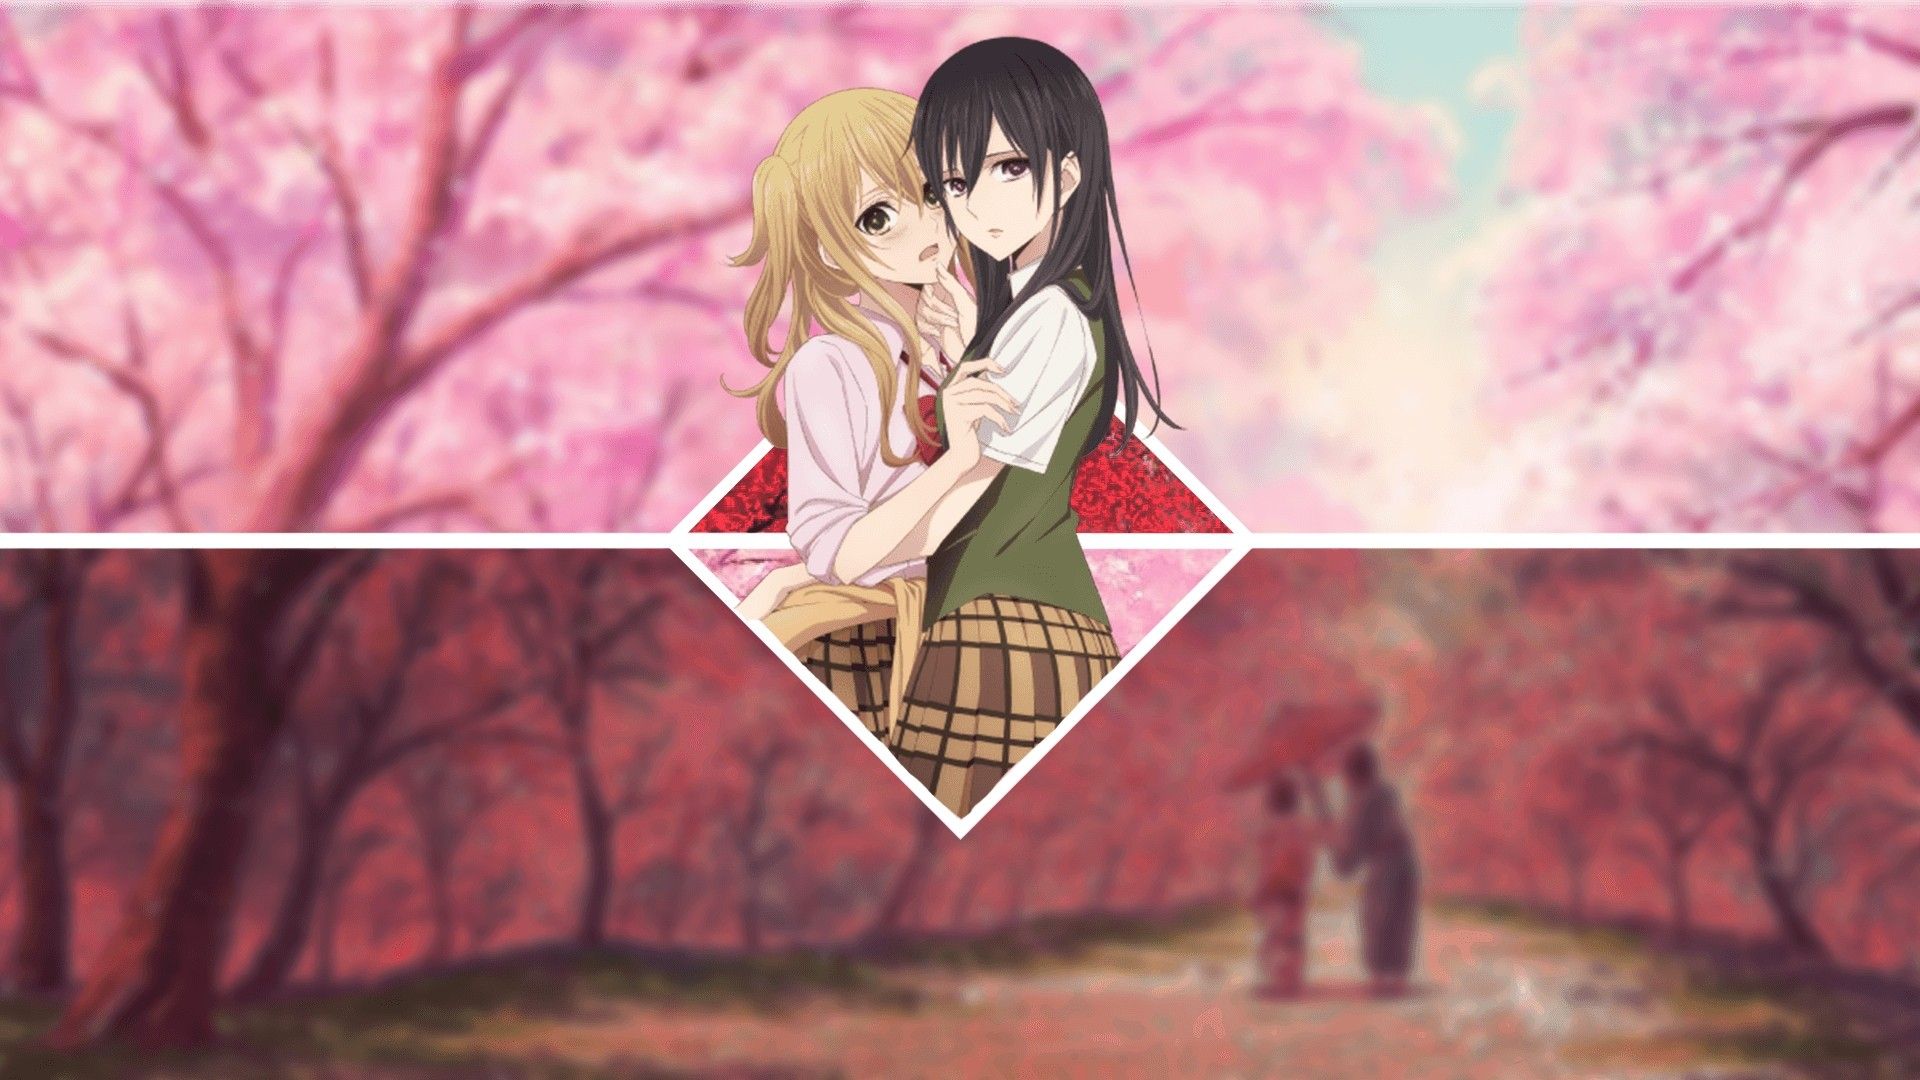 Citrus Anime Wallpapers: 20+ Image.